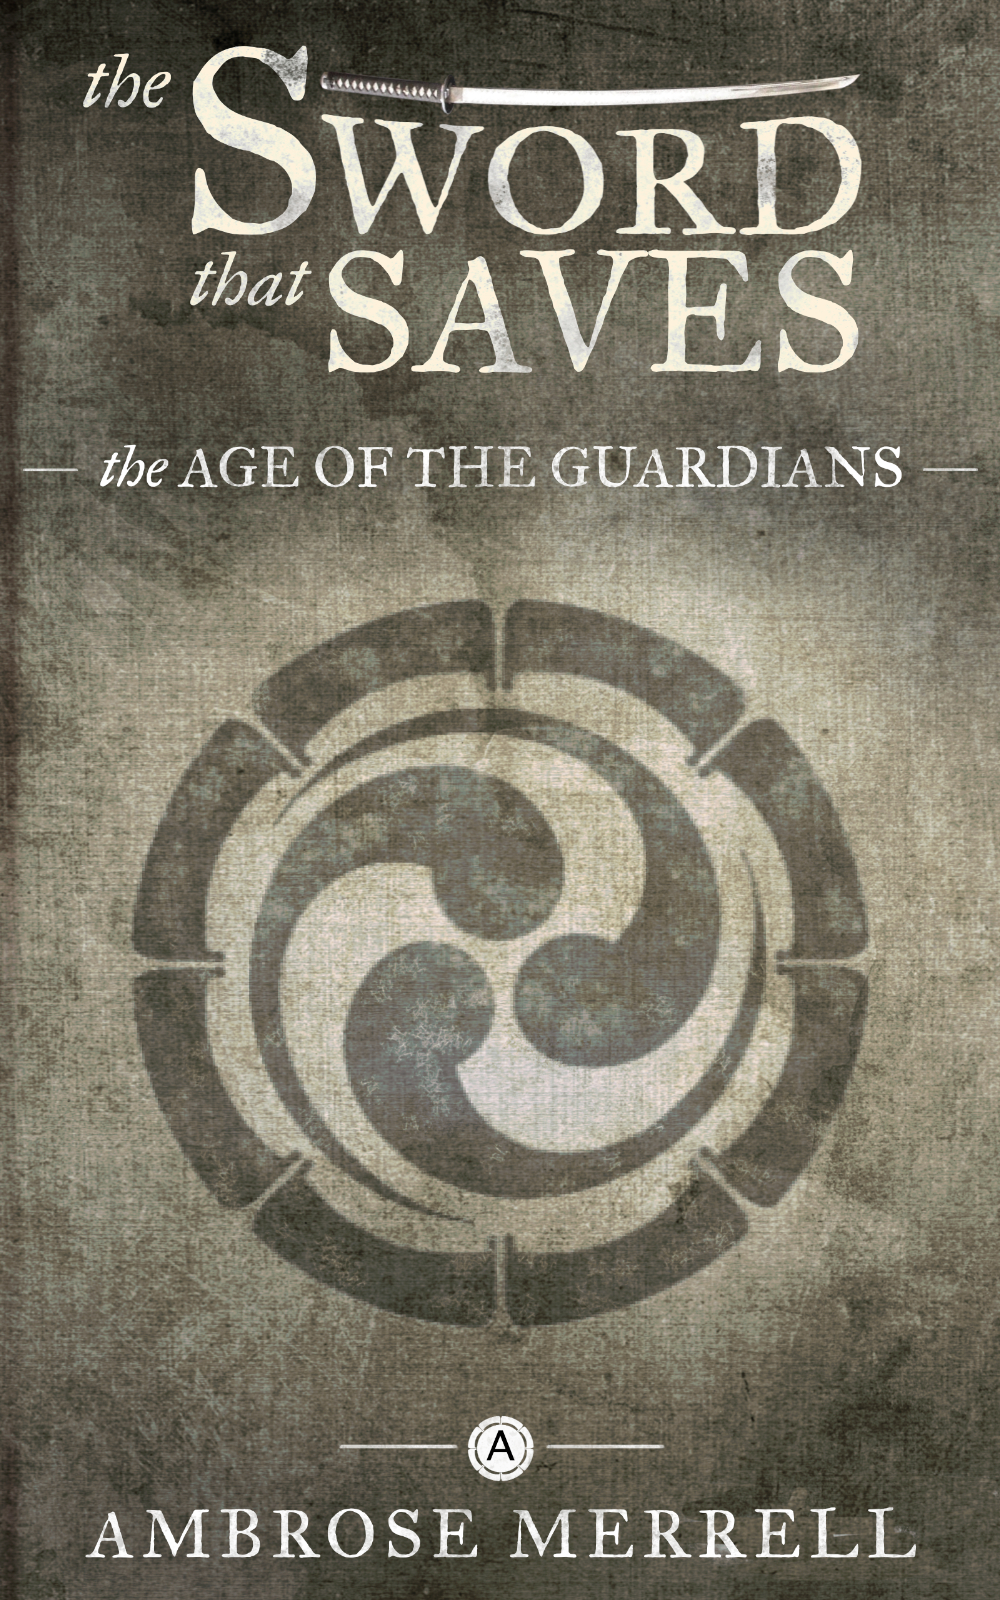 The Sword That Saves - The Age of the Guardians